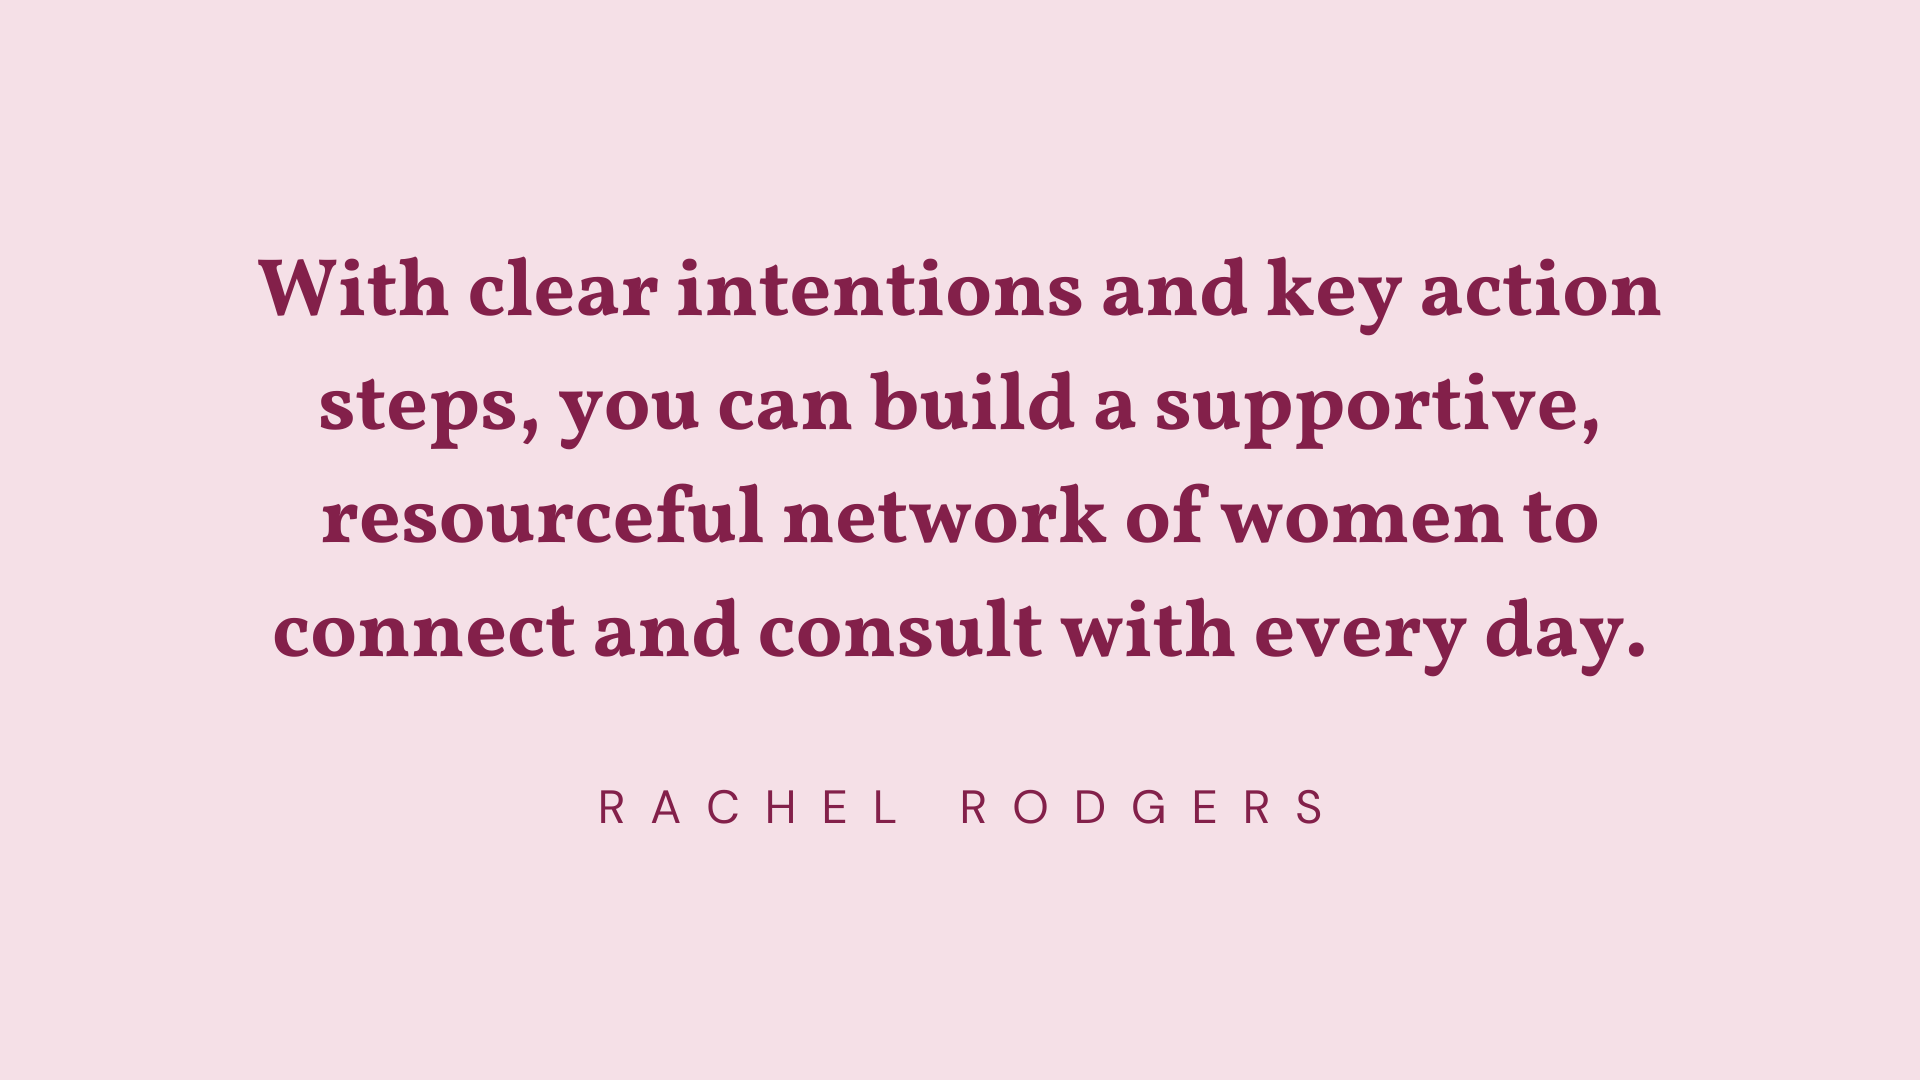 “With clear intentions and key action steps, you can build a supportive, resourceful network of women to connect and consult with every day.” - Rachel Rodgers quote